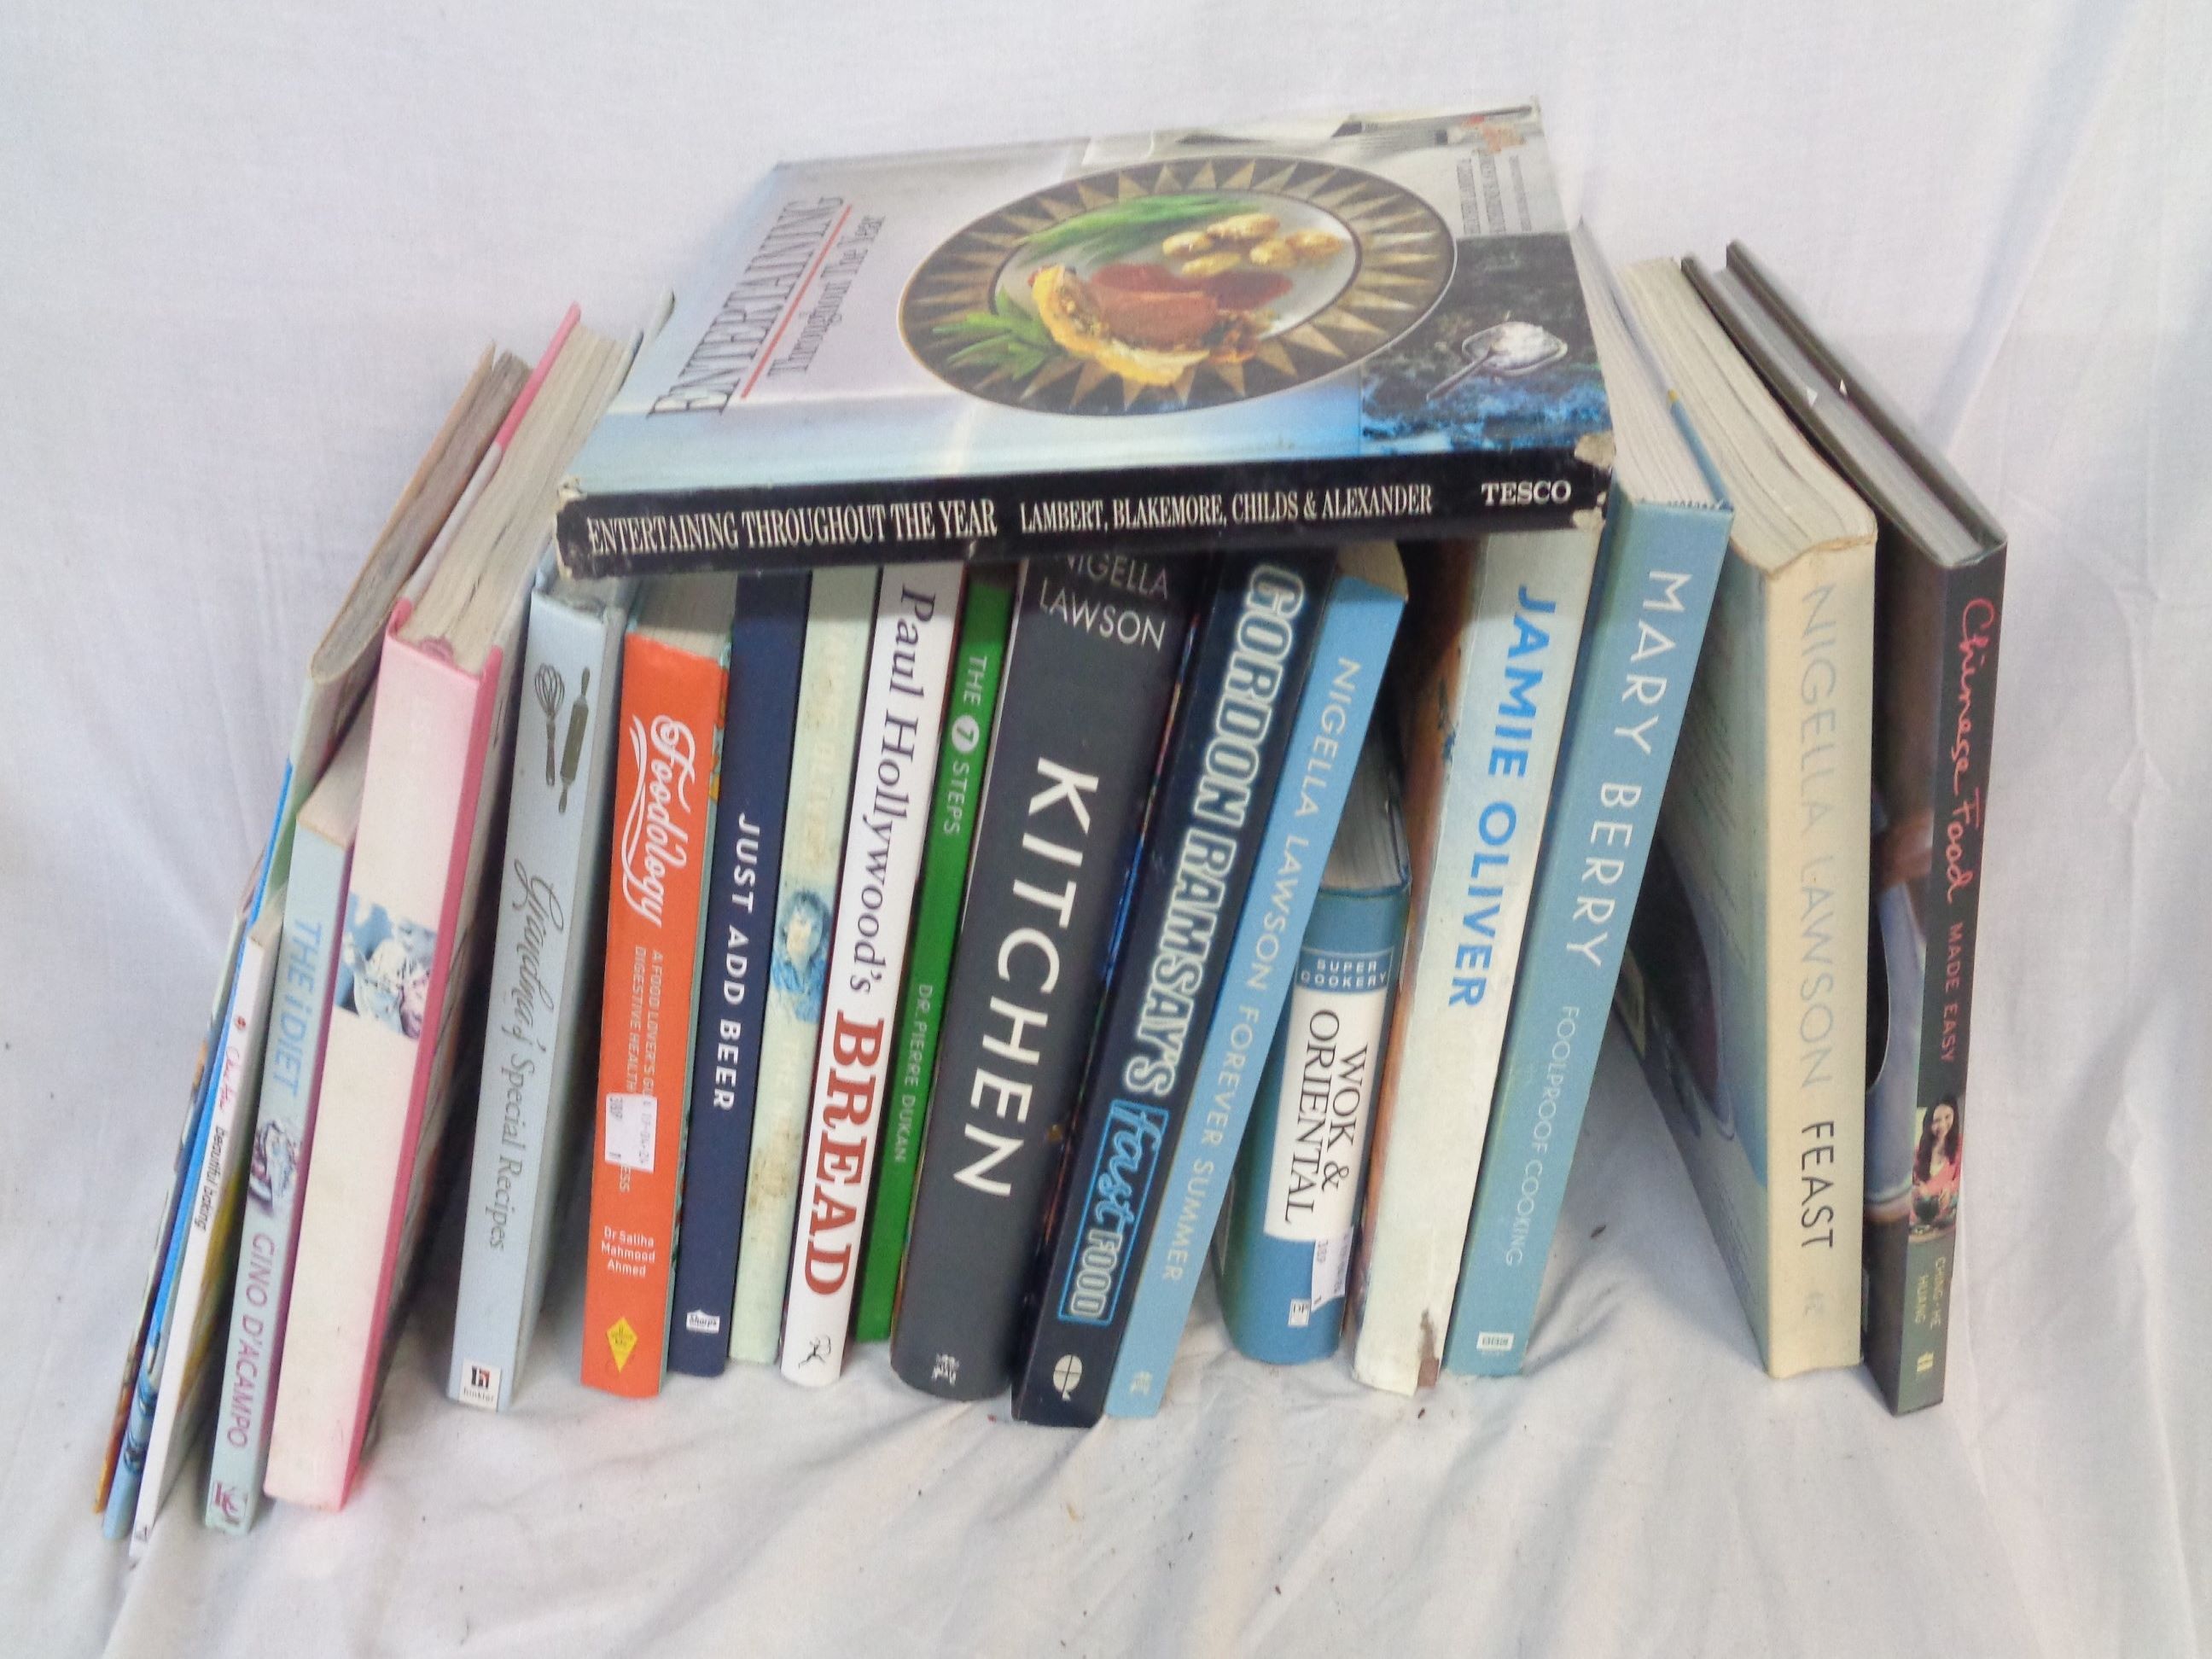 A collection of modern hardback and other cookery books including Nigella Lawson, Jamie Oliver, Paul